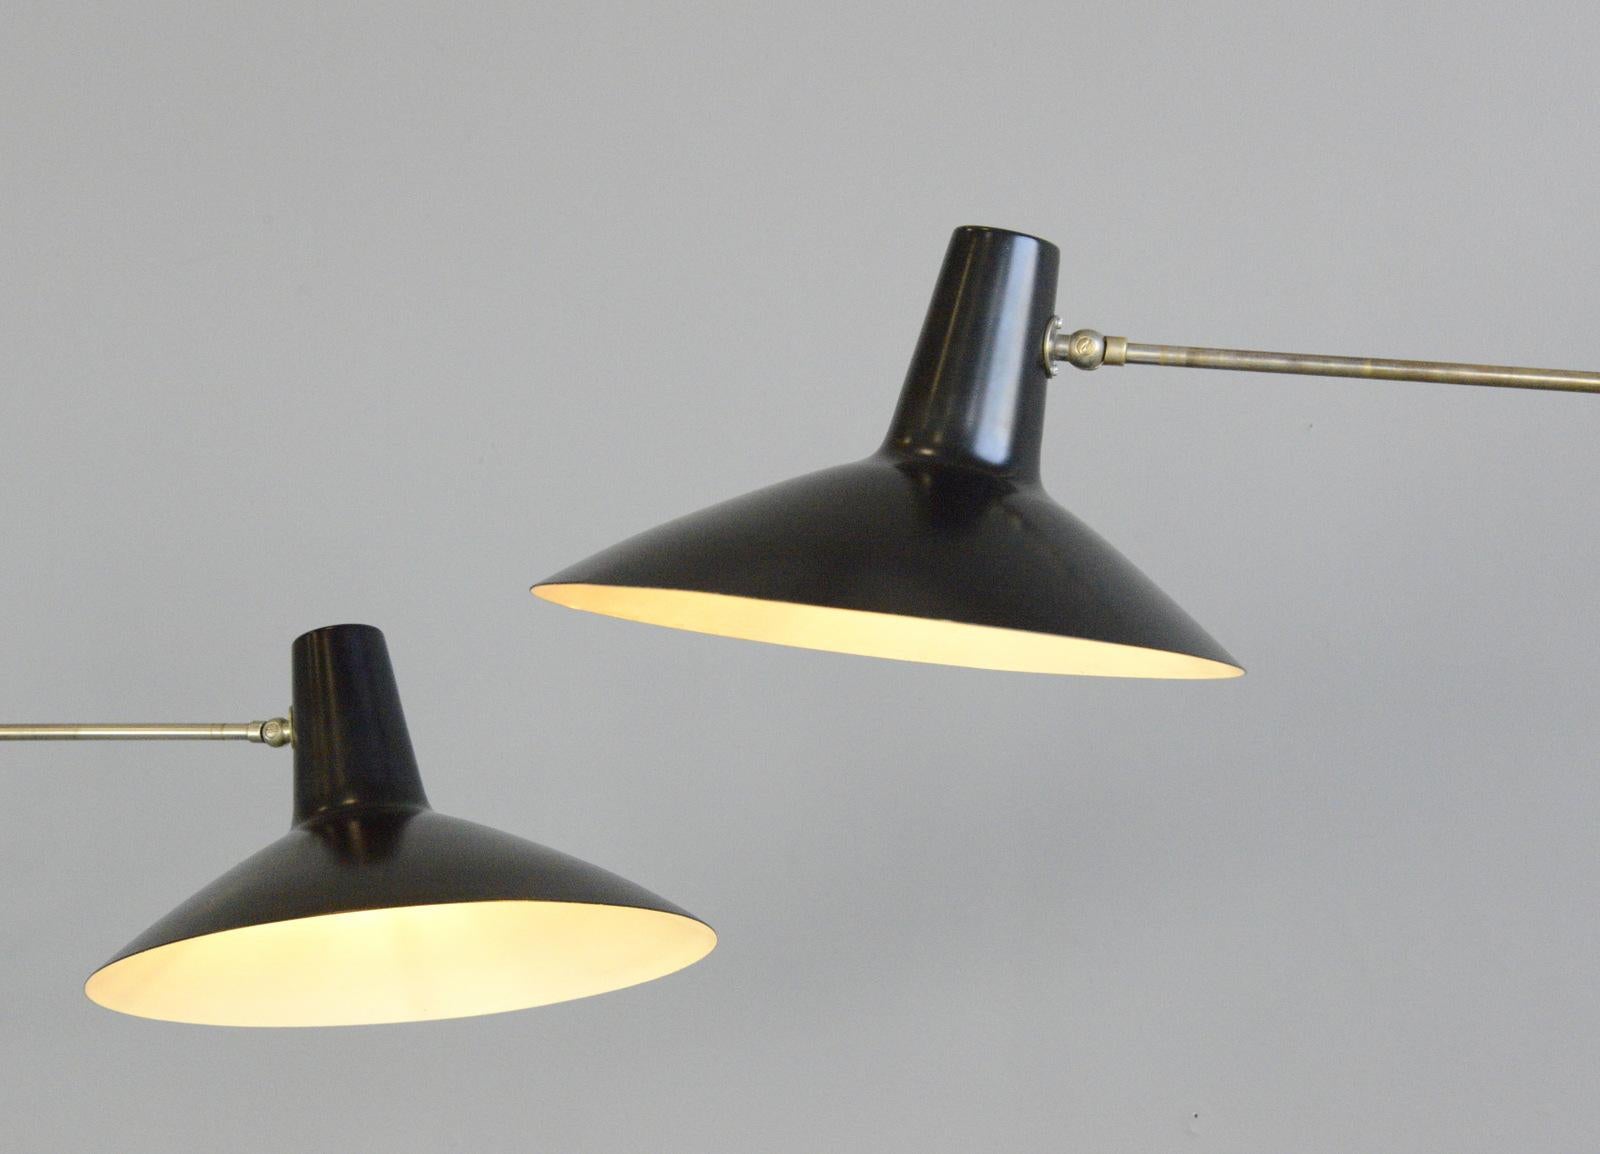 Midcentury wall lamps by Artimeta, circa 1950s

- Price is per light (2 available)
- Nickel plated brass arms
- Fully articulated, swing out
- Aluminium shades
- Takes E27 fitting bulbs
- On/Off toggle switch on the cord
- Made by Artimeta,